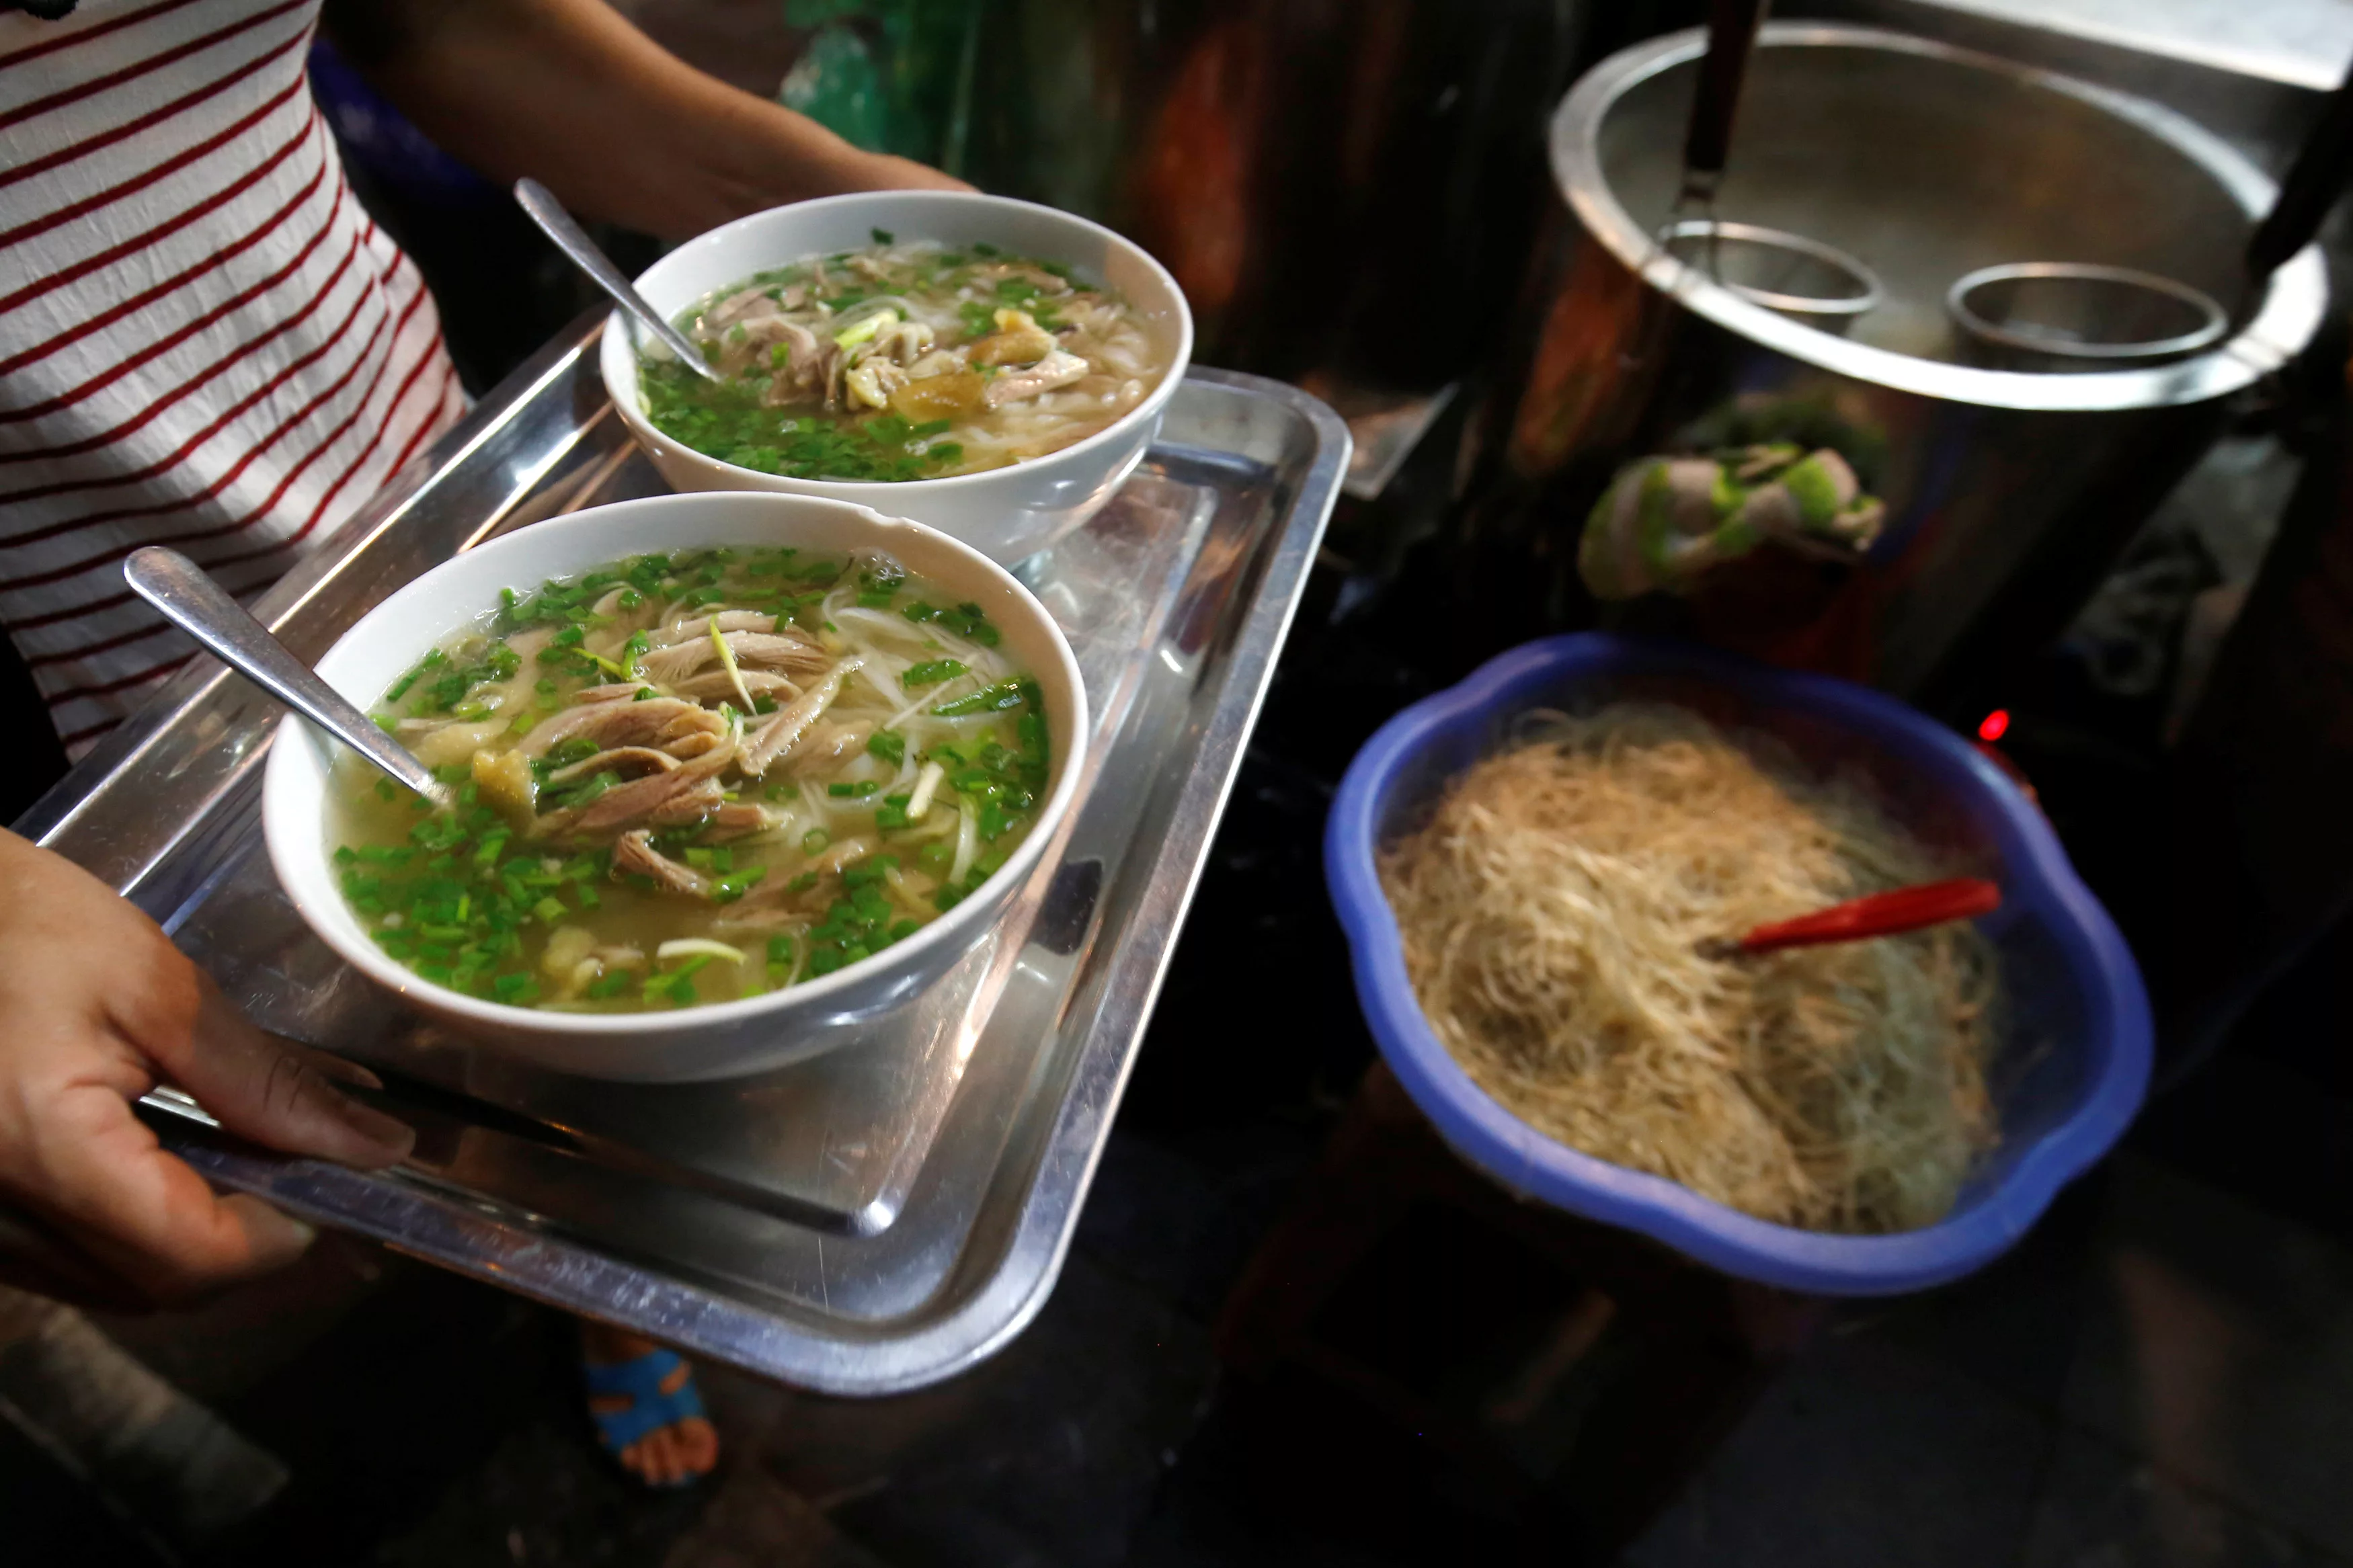 a-woman-carries-bowls-of-vietnamese-chicken-noodle-soup-pho-at-a-restaurant-in-hanoi